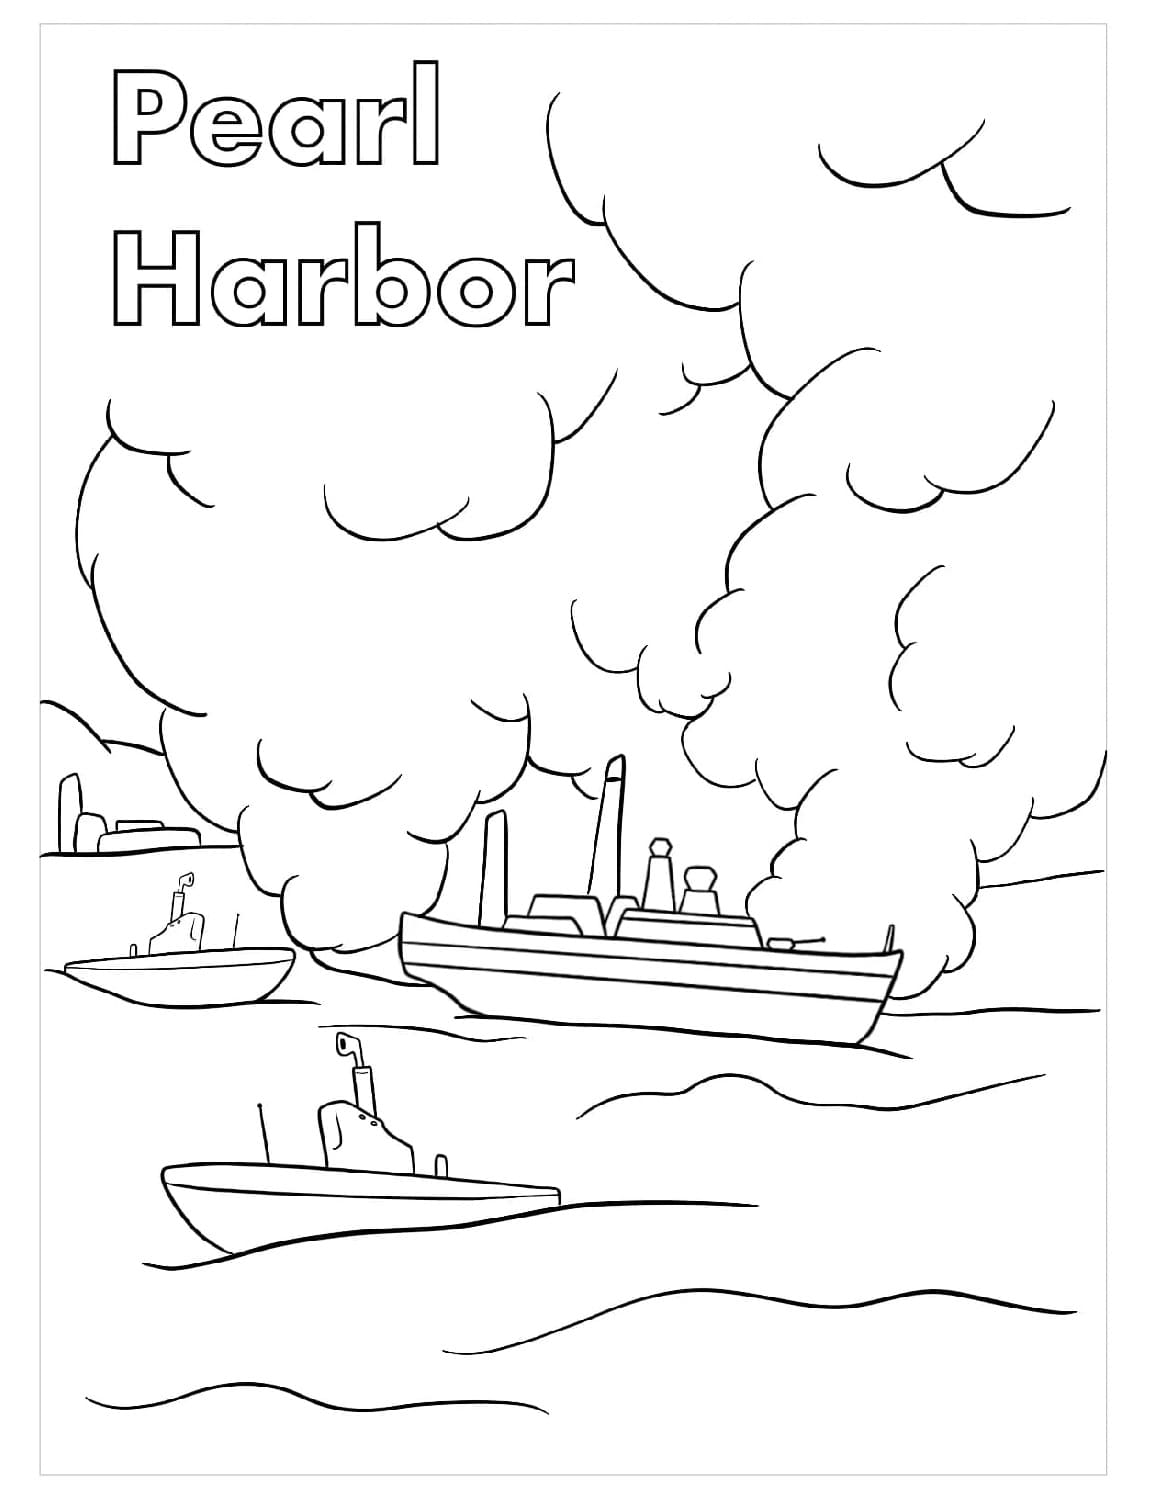 Pearl harbor ships coloring page